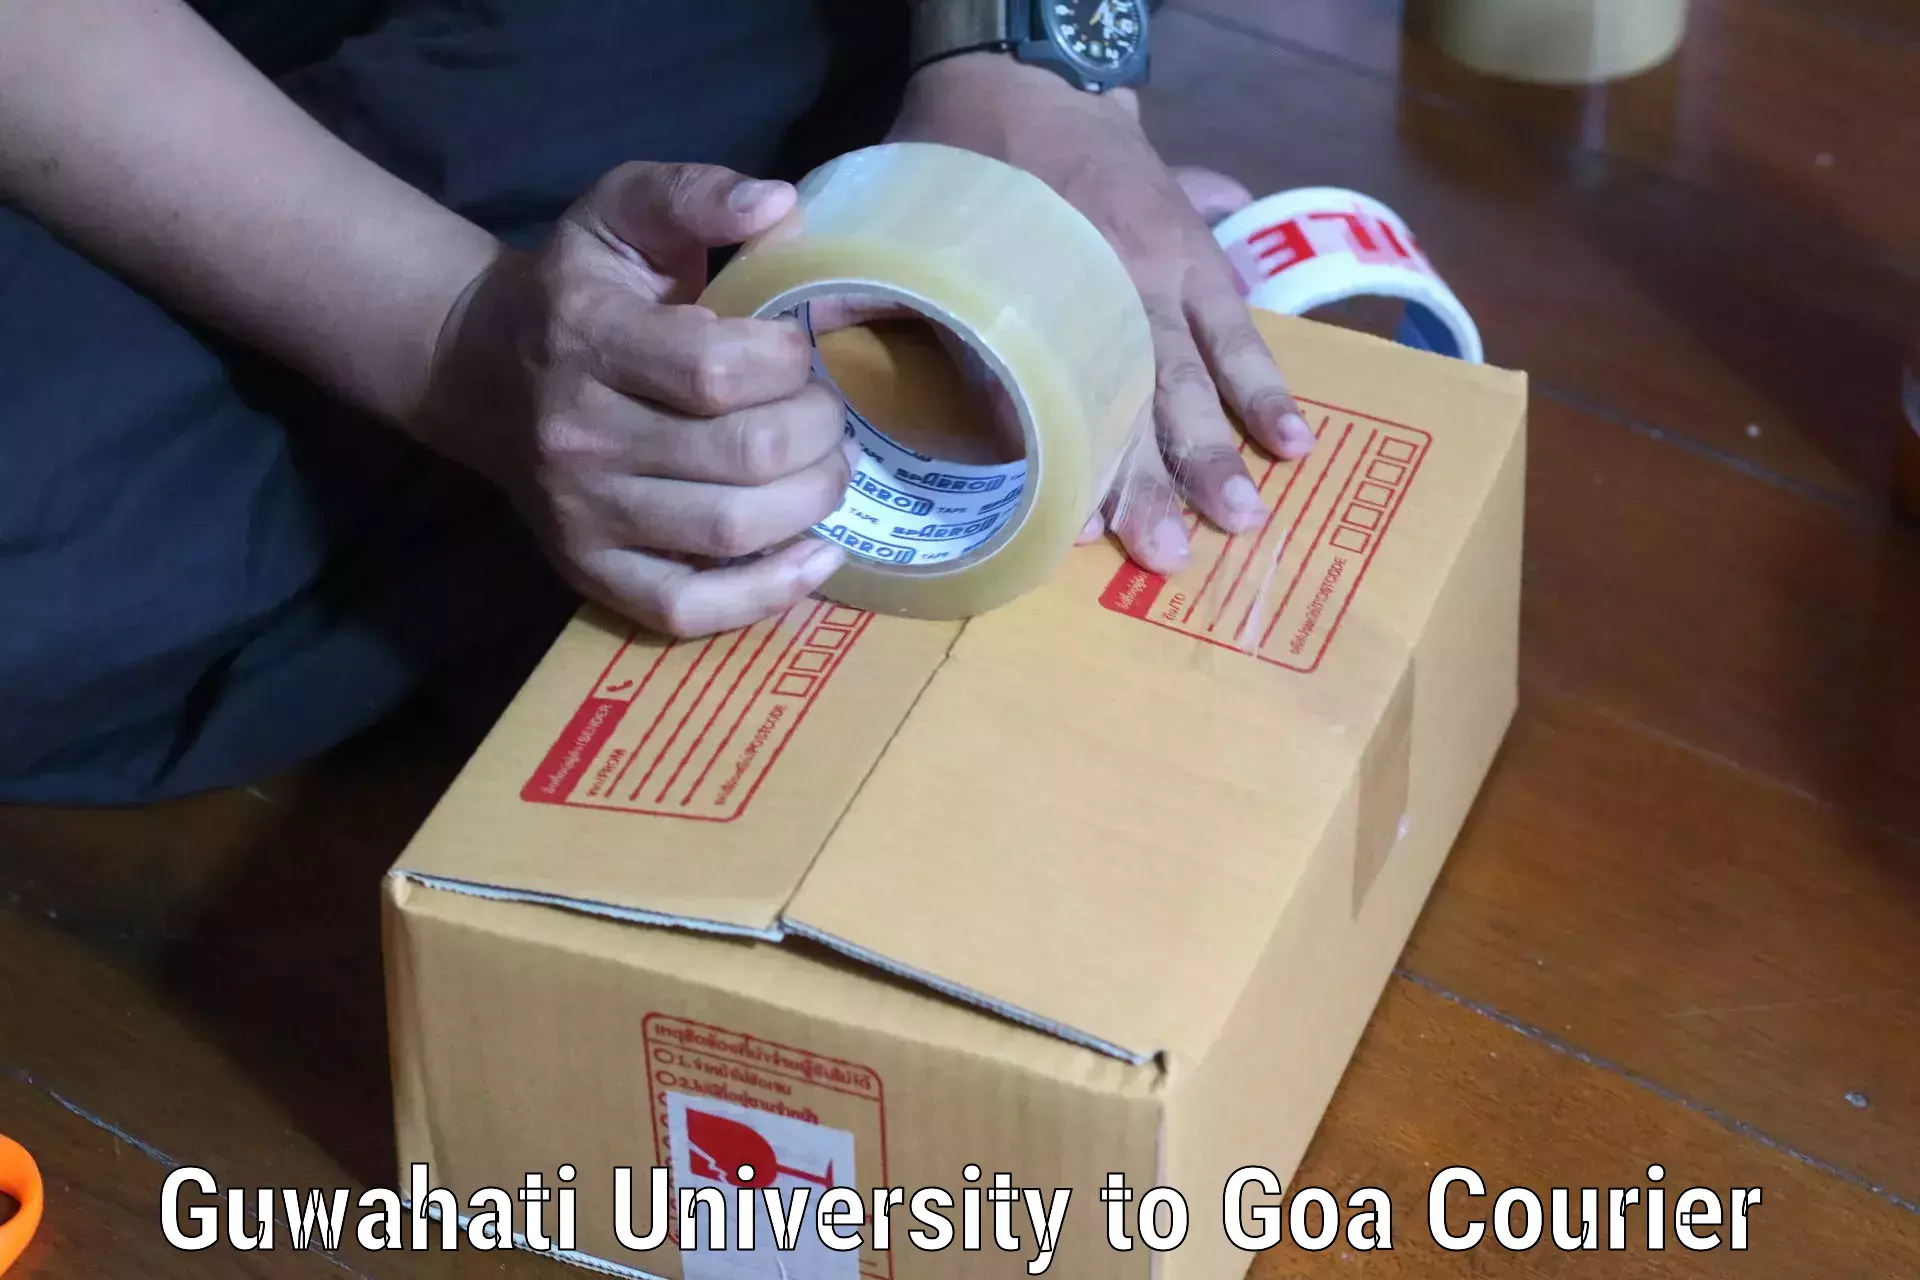 Small parcel delivery in Guwahati University to NIT Goa